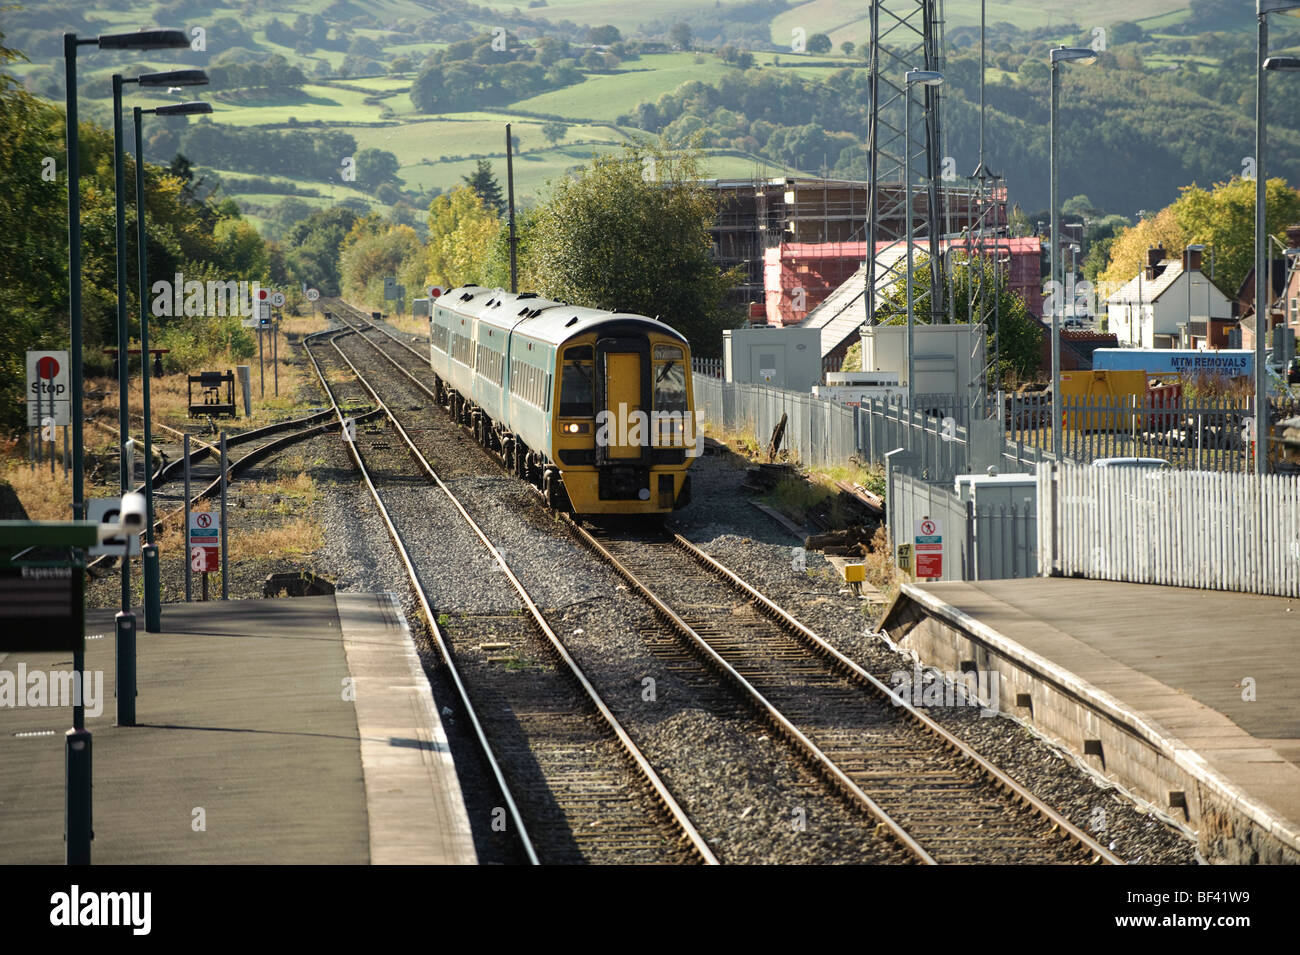 Arriva trains wales Diesel Multiple unit train approaching Newtown railway station, Powys, Mid Wales UK Stock Photo